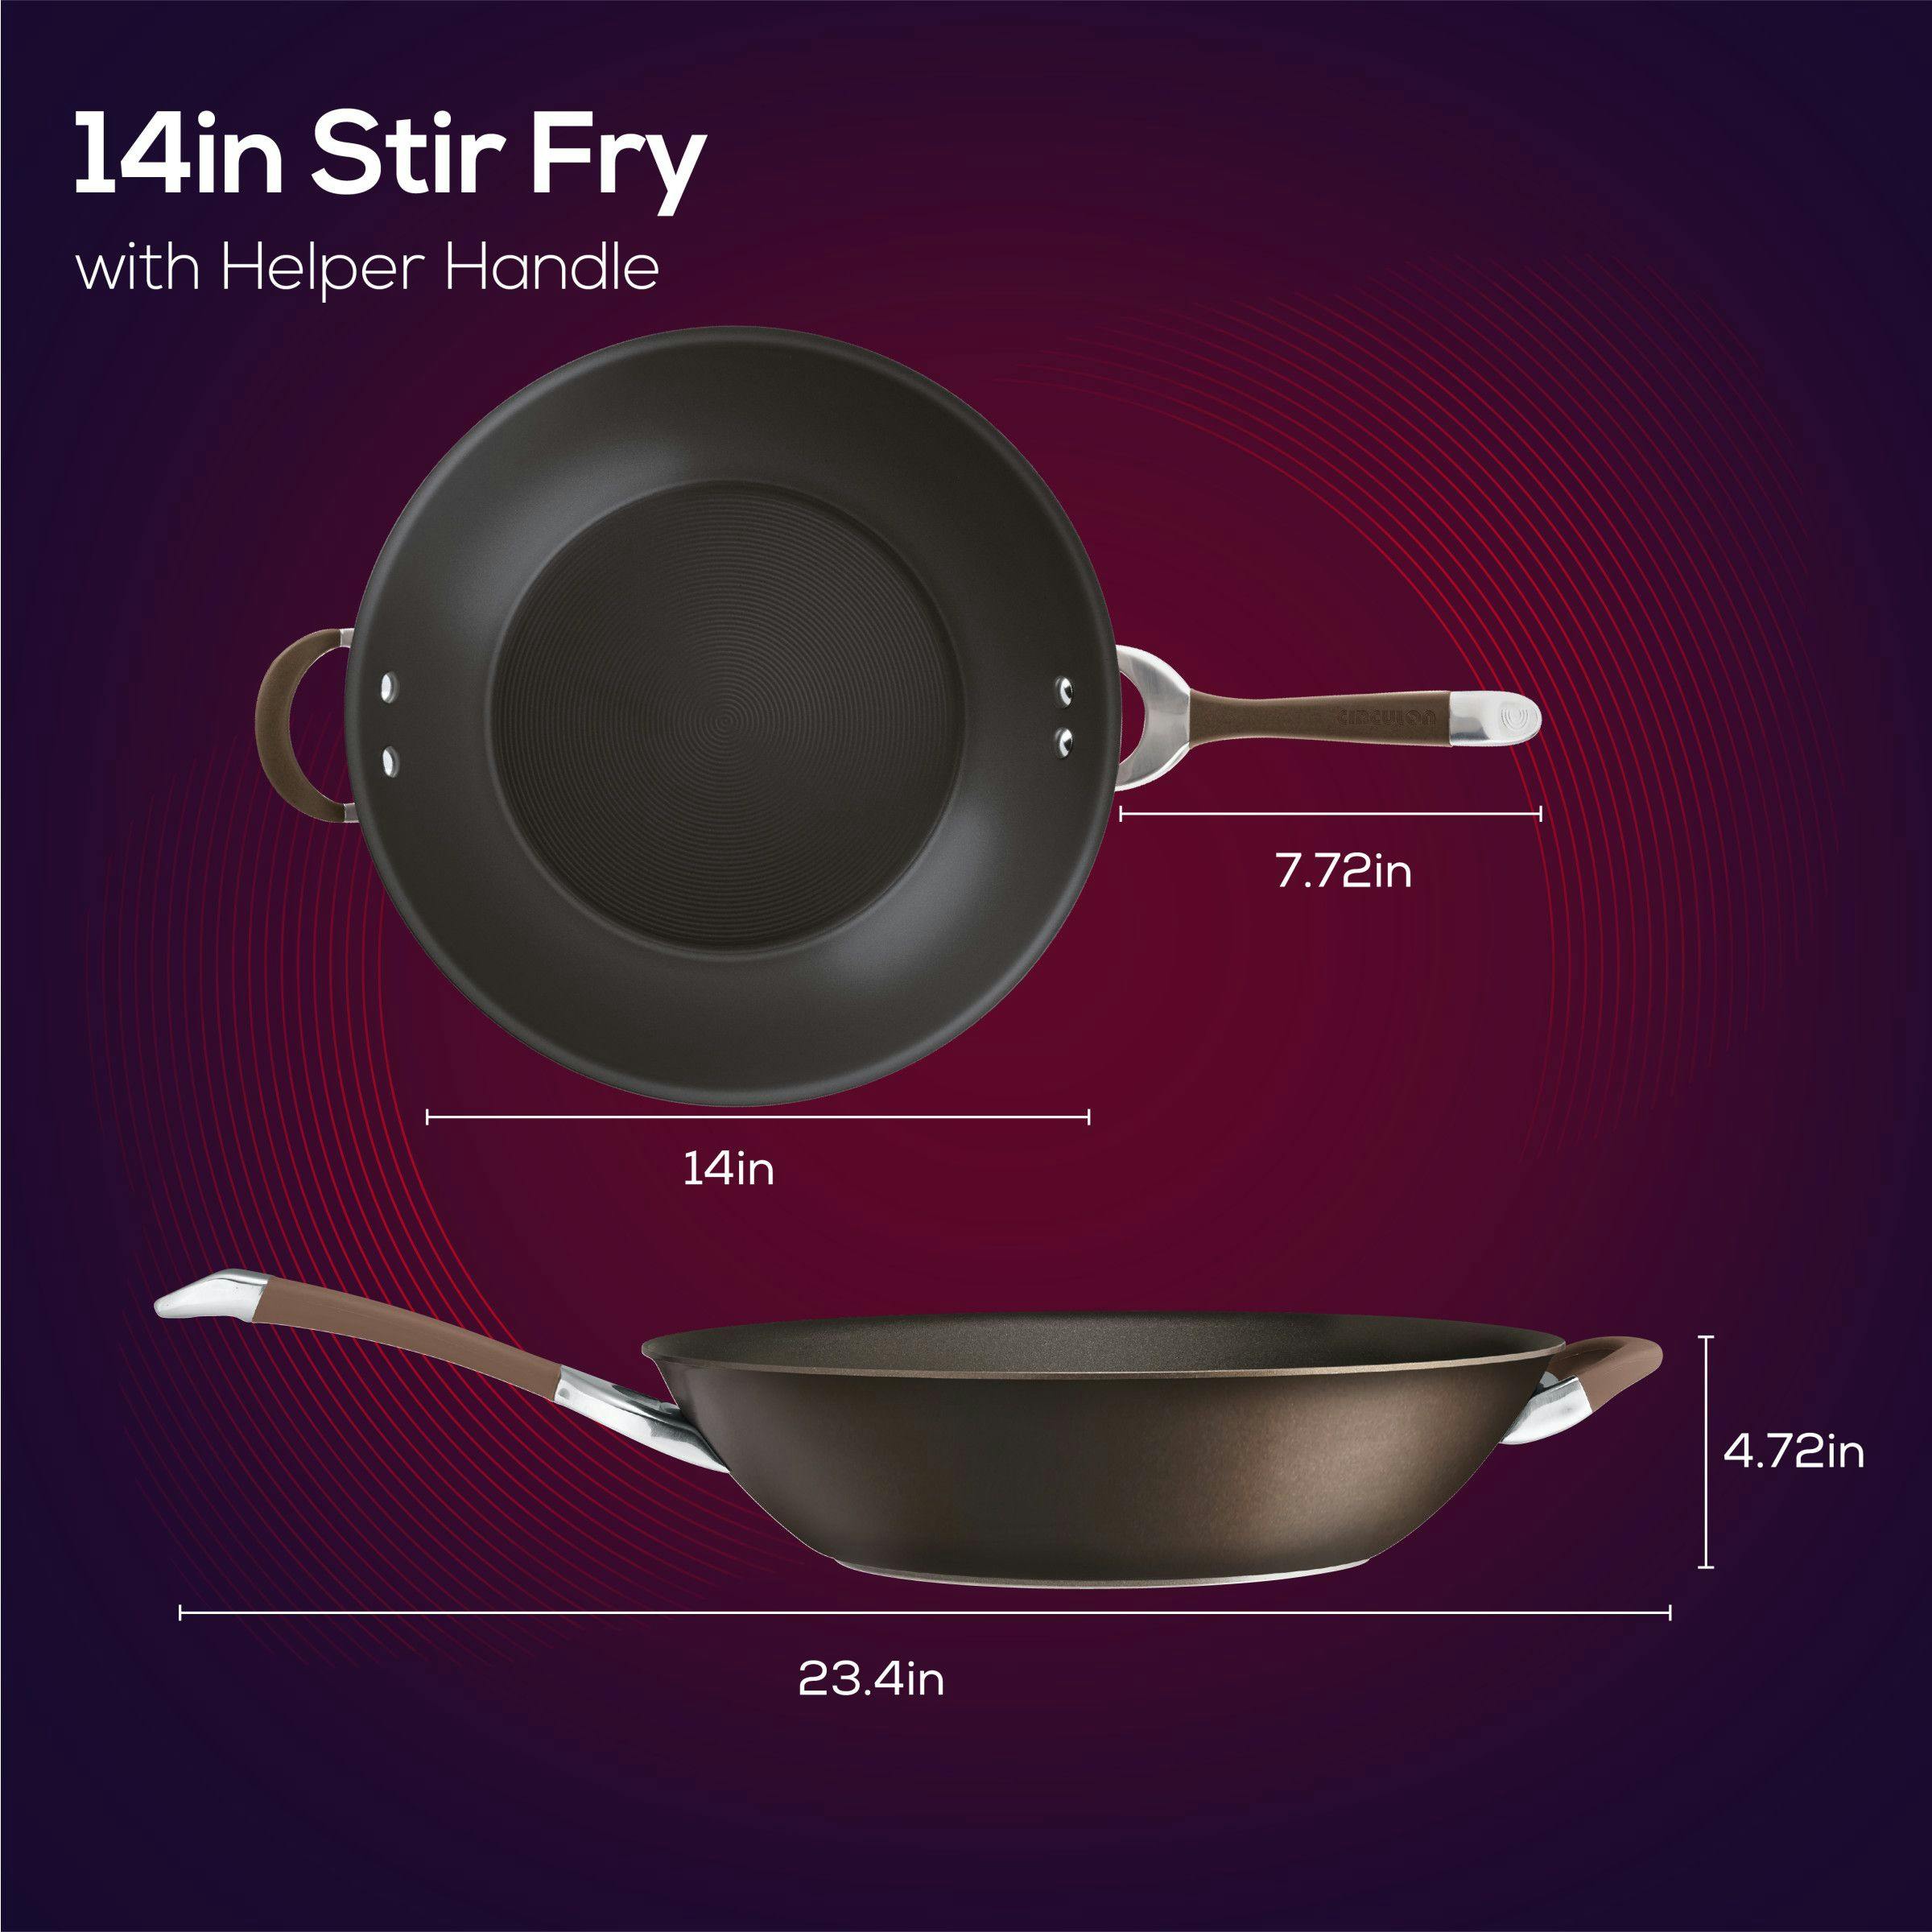 Circulon Symmetry Hard-Anodized Nonstick Induction Stir Fry Pan with Helper Handle, 14-Inch